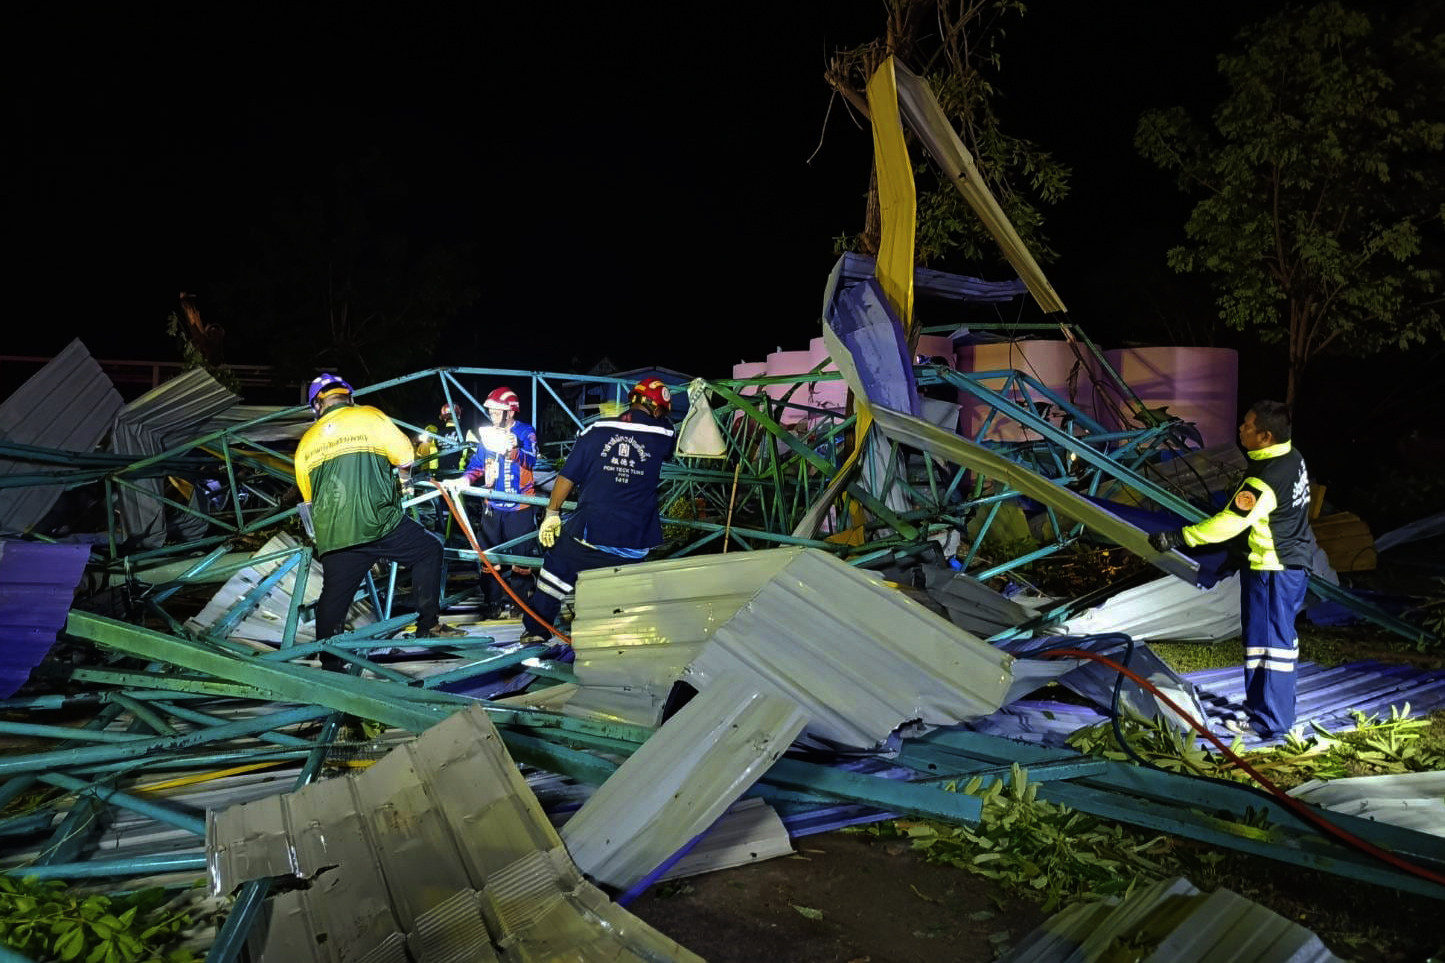 Thai rescue workers at the scene of a collapsed metal roof on a structure at the Wat Nern Por primary school in Phichit province in northern Thailand. Photo: via AP